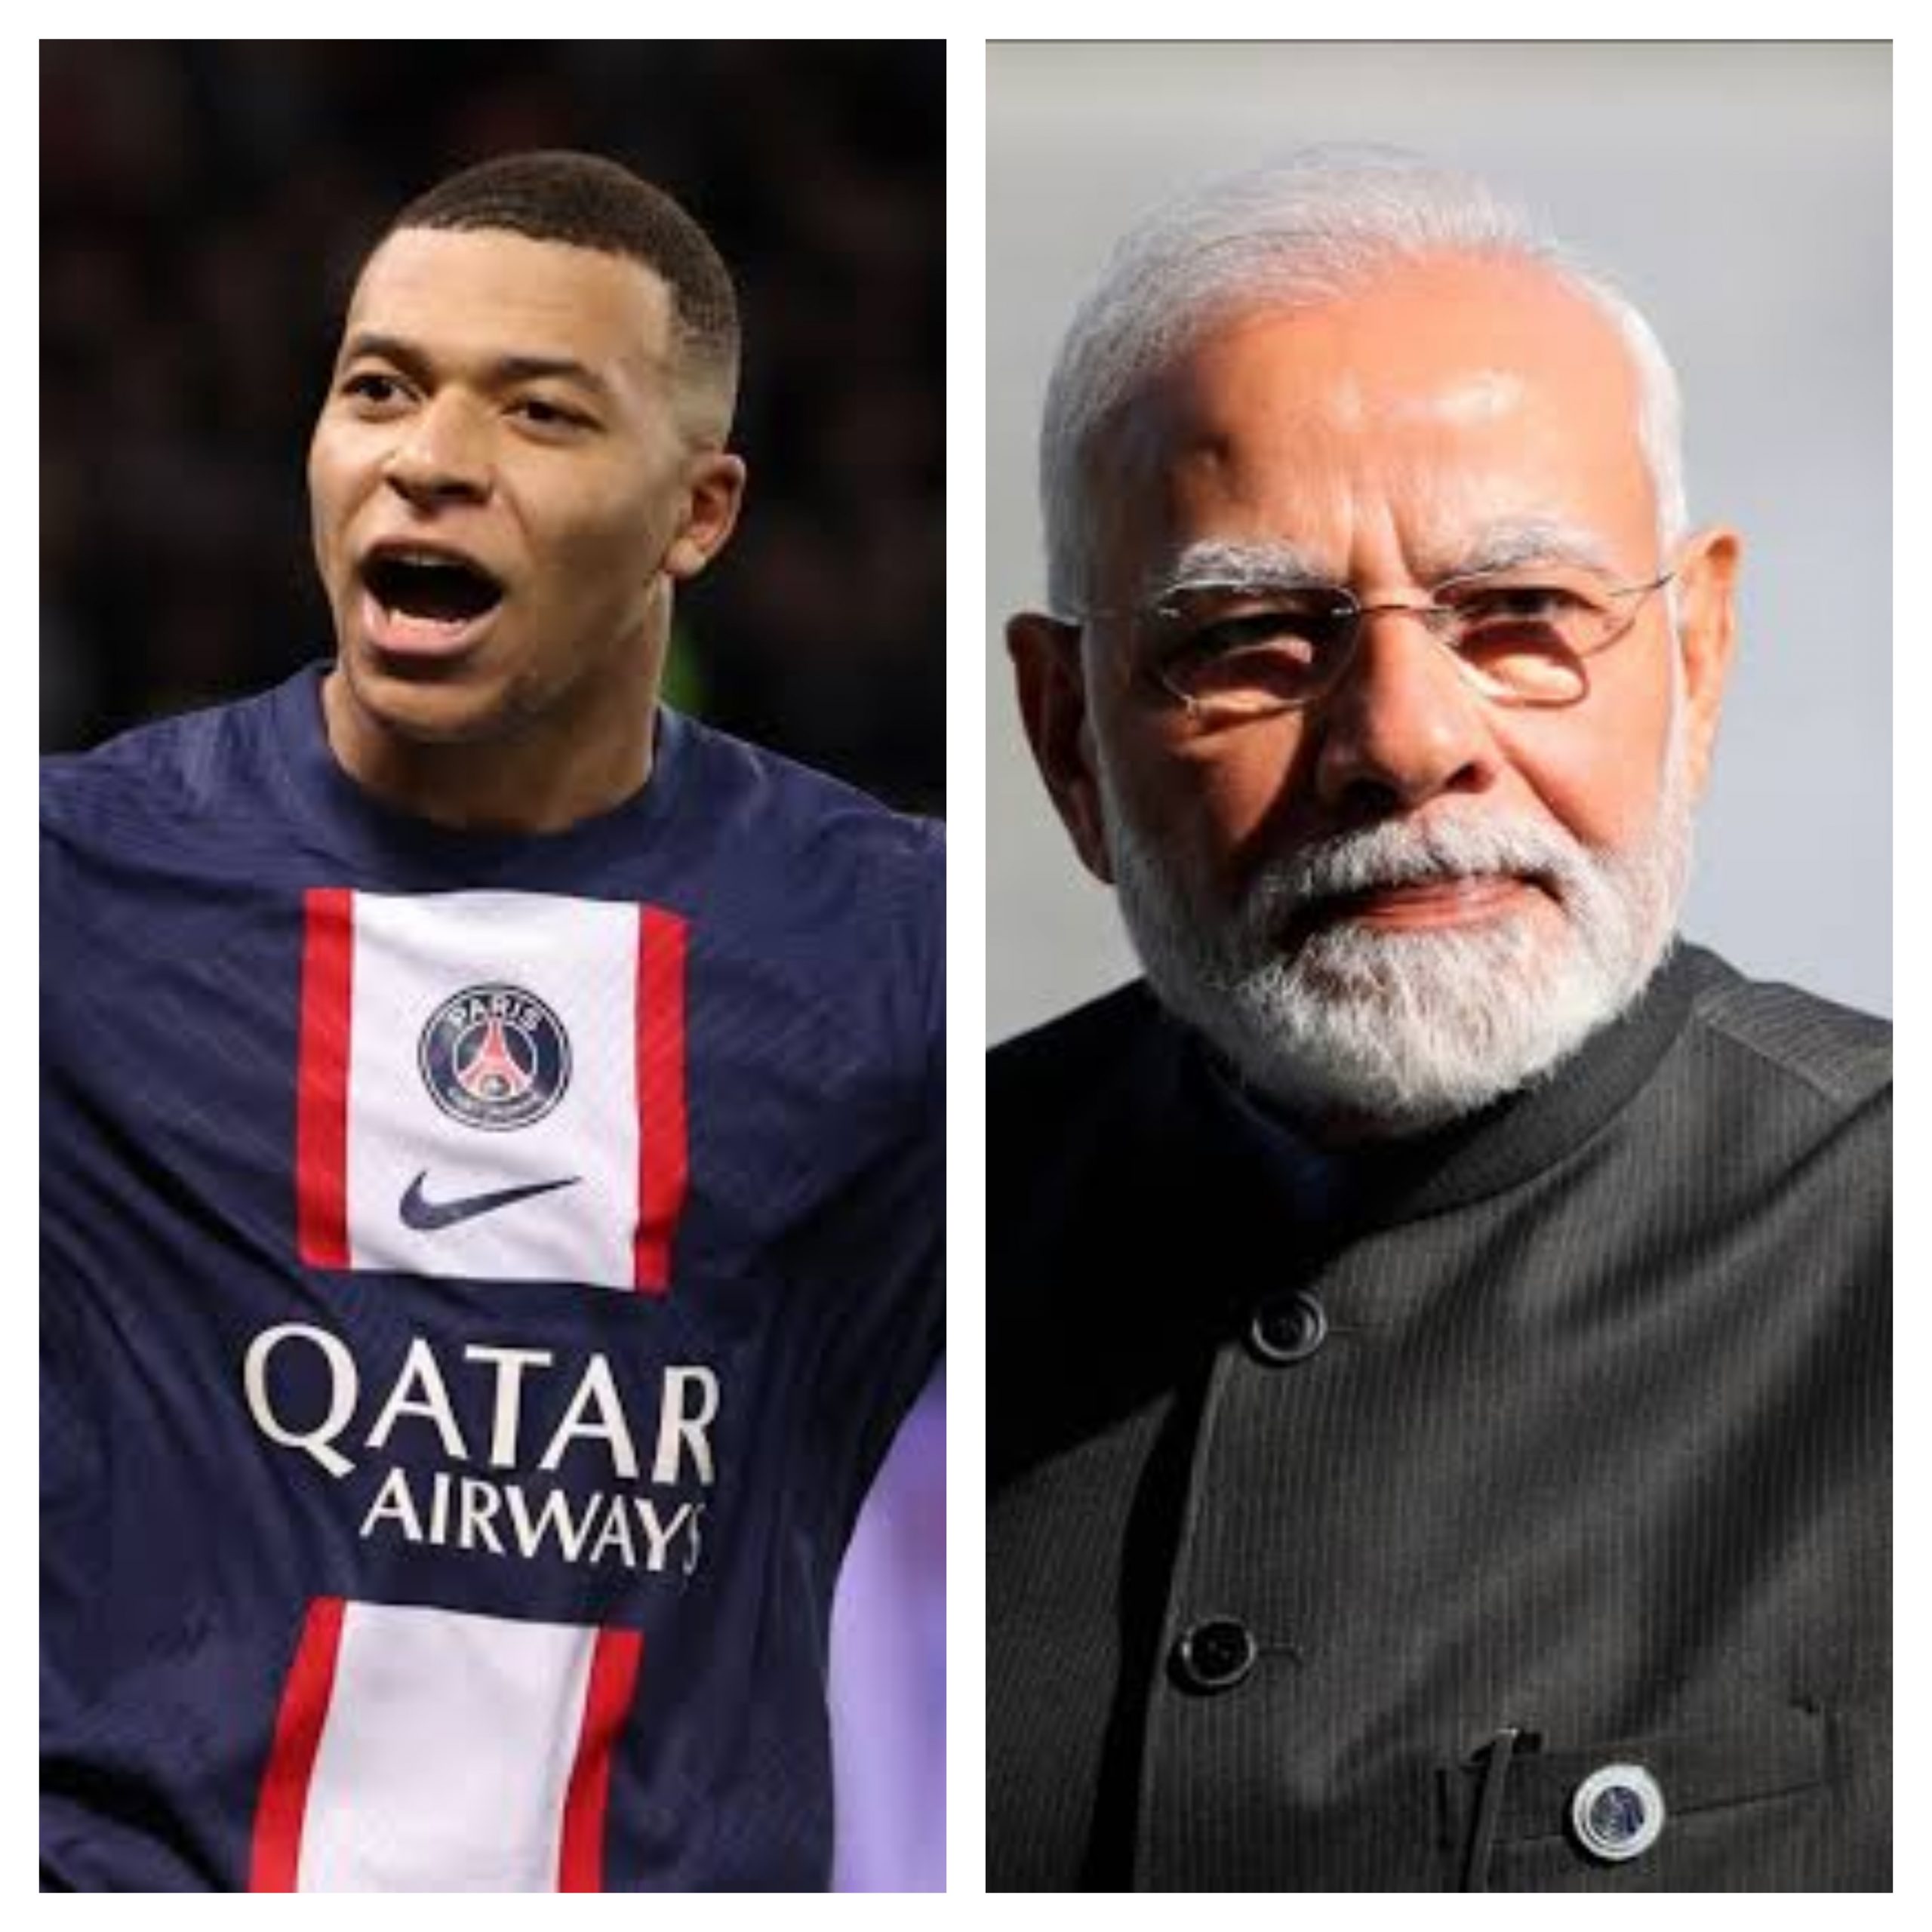 PM Modi applauds Kylian Mbappe’s rising popularity among Indian youth